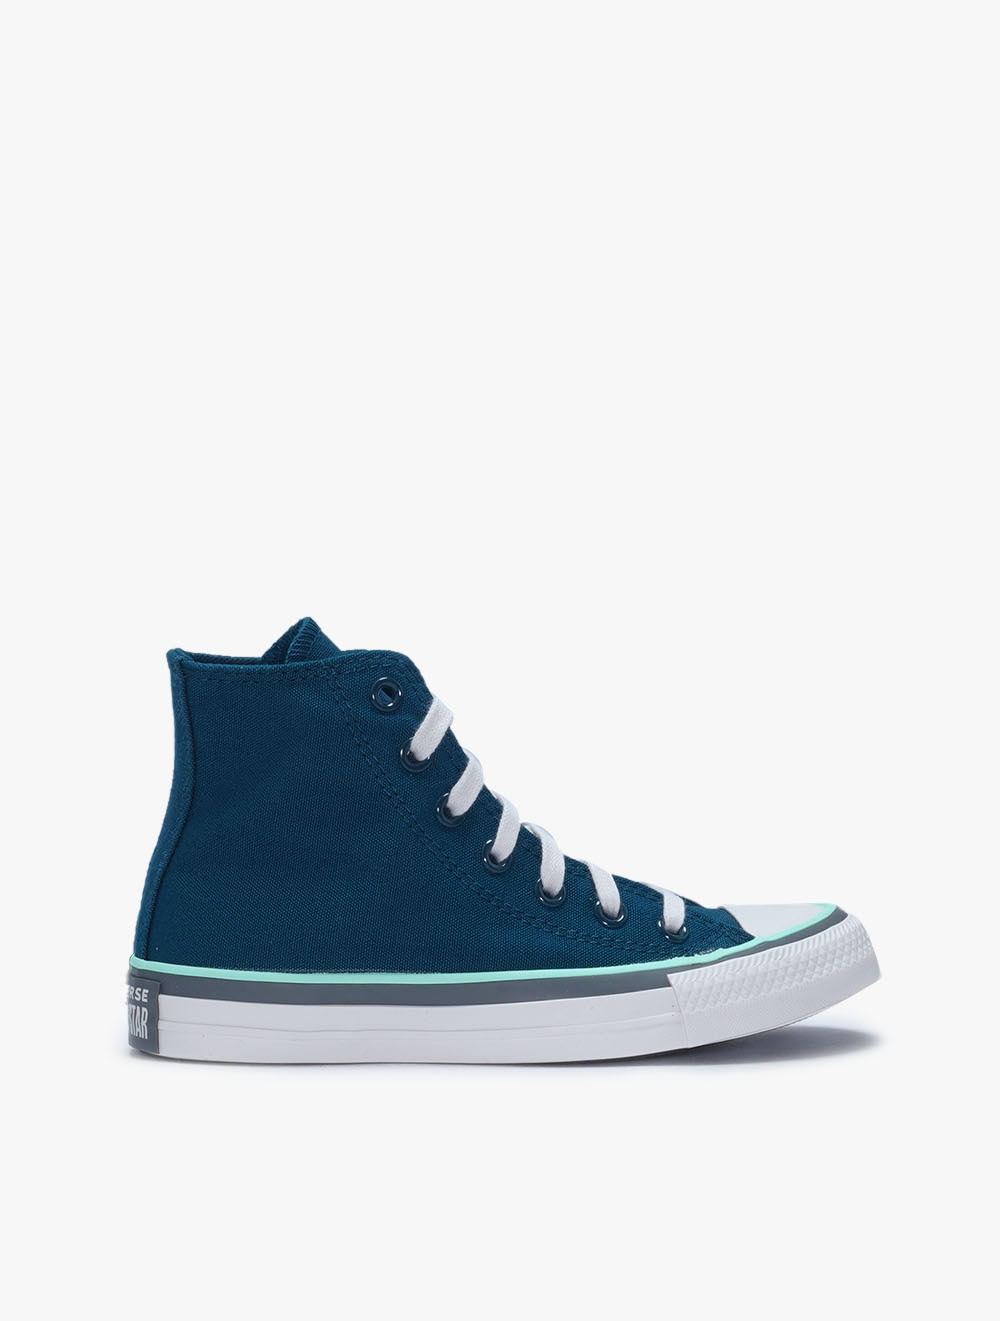 Giày Thể Thao Converse Chuck Taylor All Star Edge Glow Unisex Sneakers -  Midnight Turq/Pale Putty 